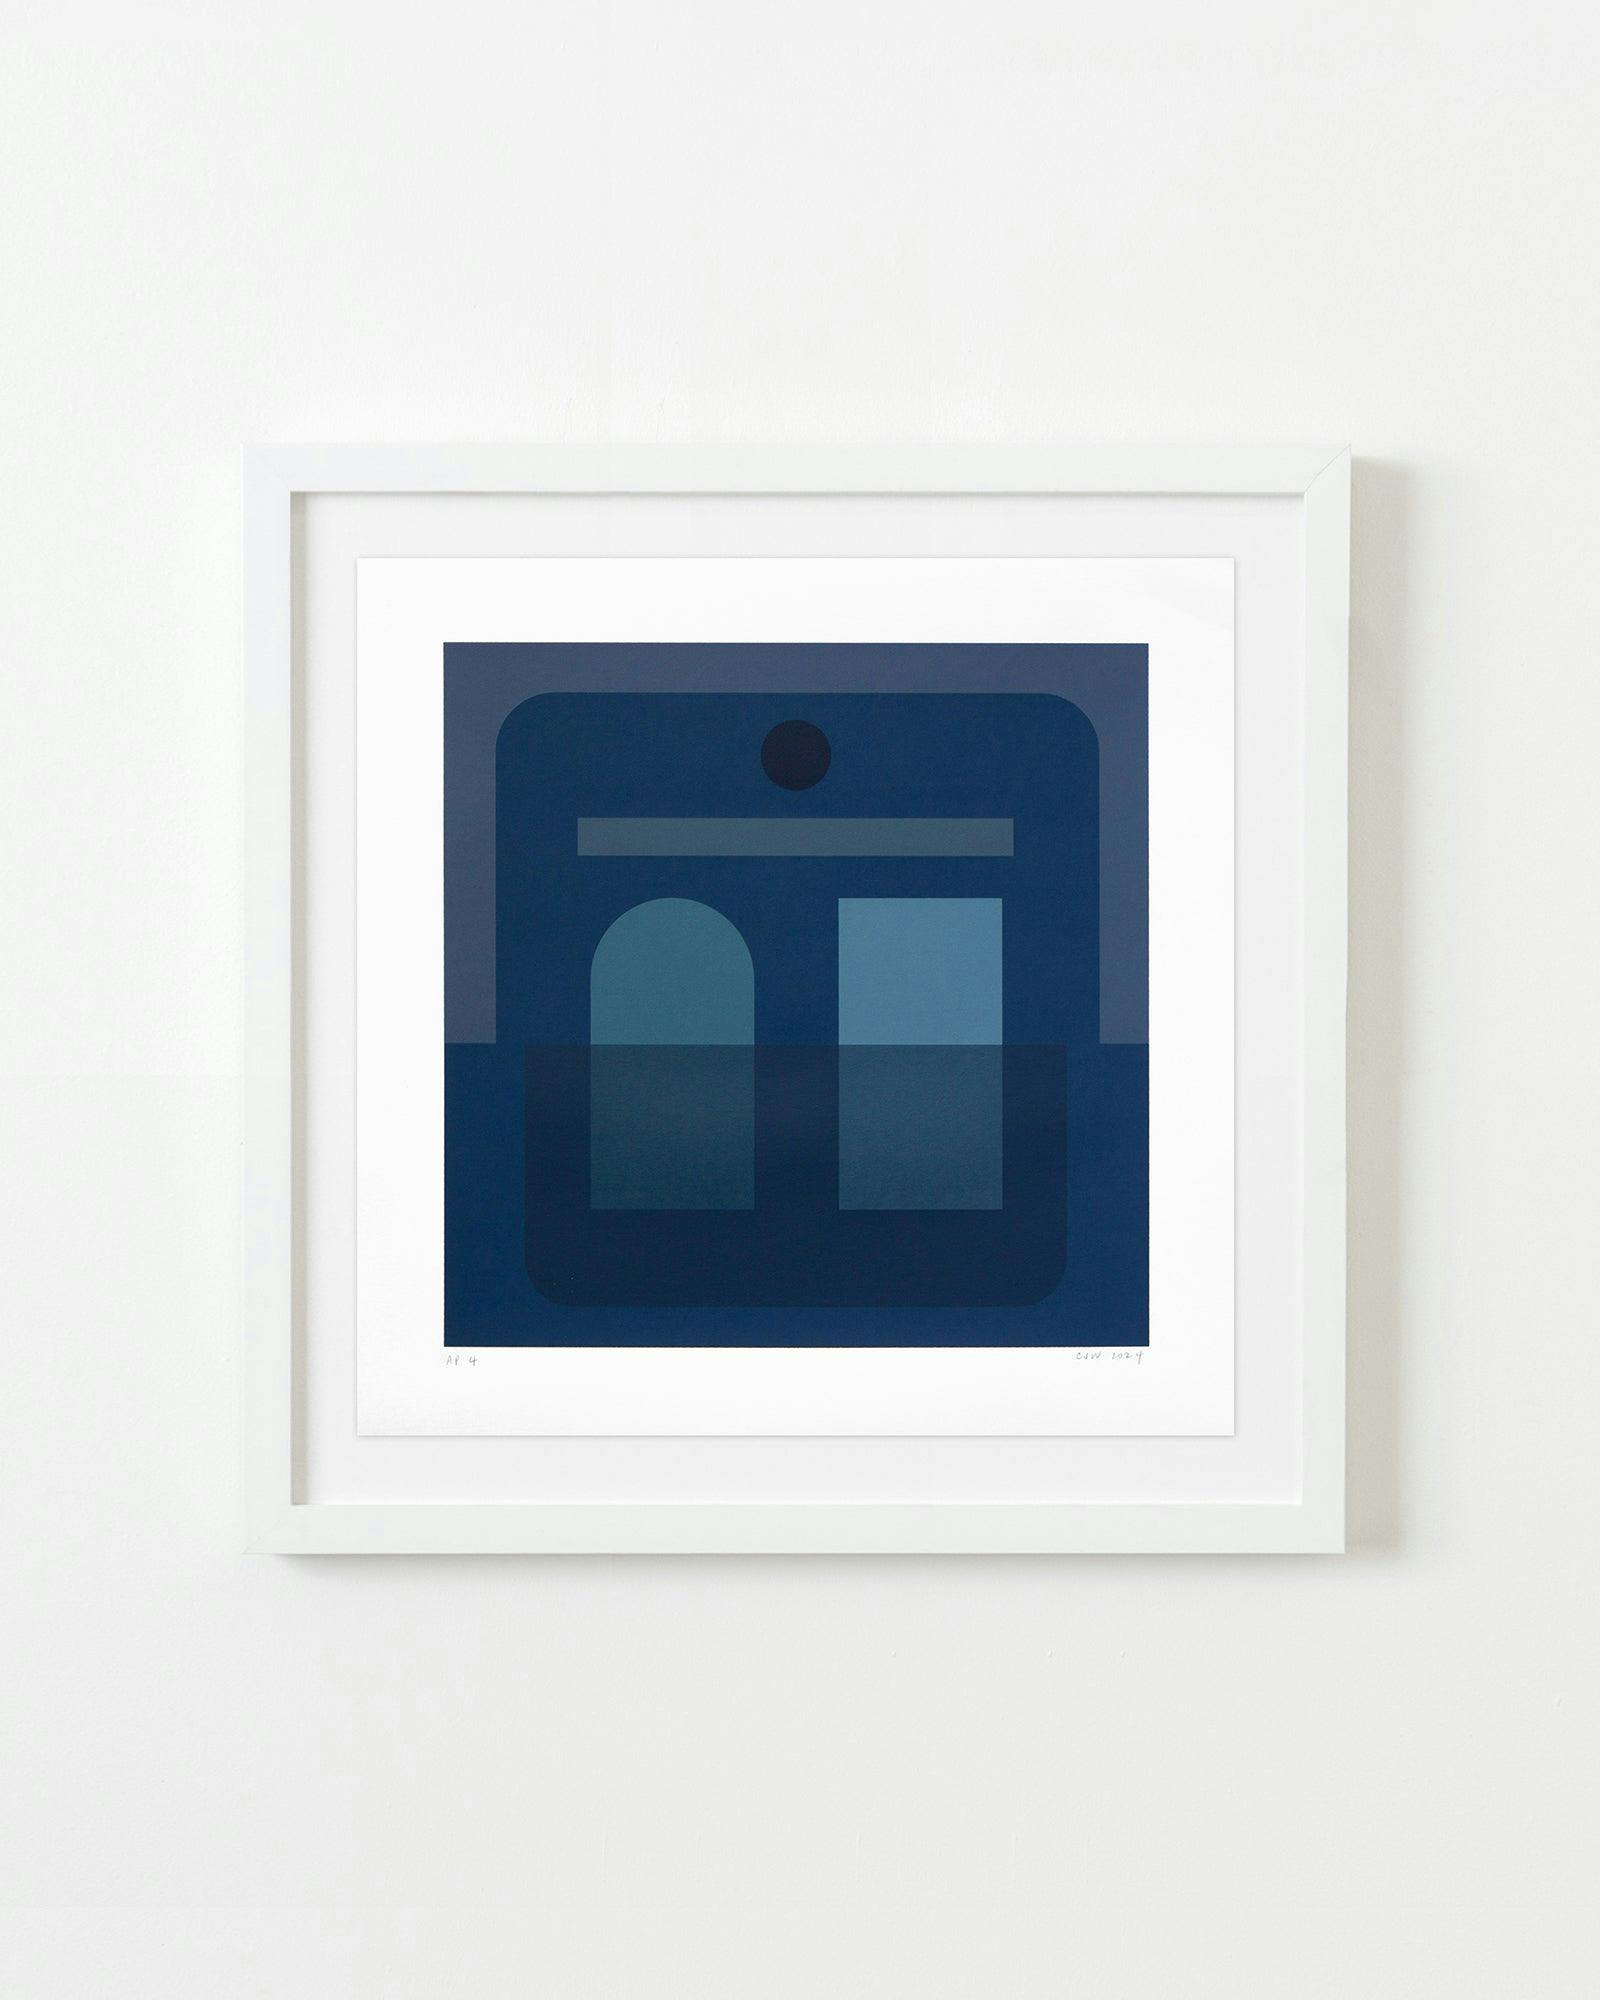 Print by Carla Weeks titled "Vocab Color Study in Blue".